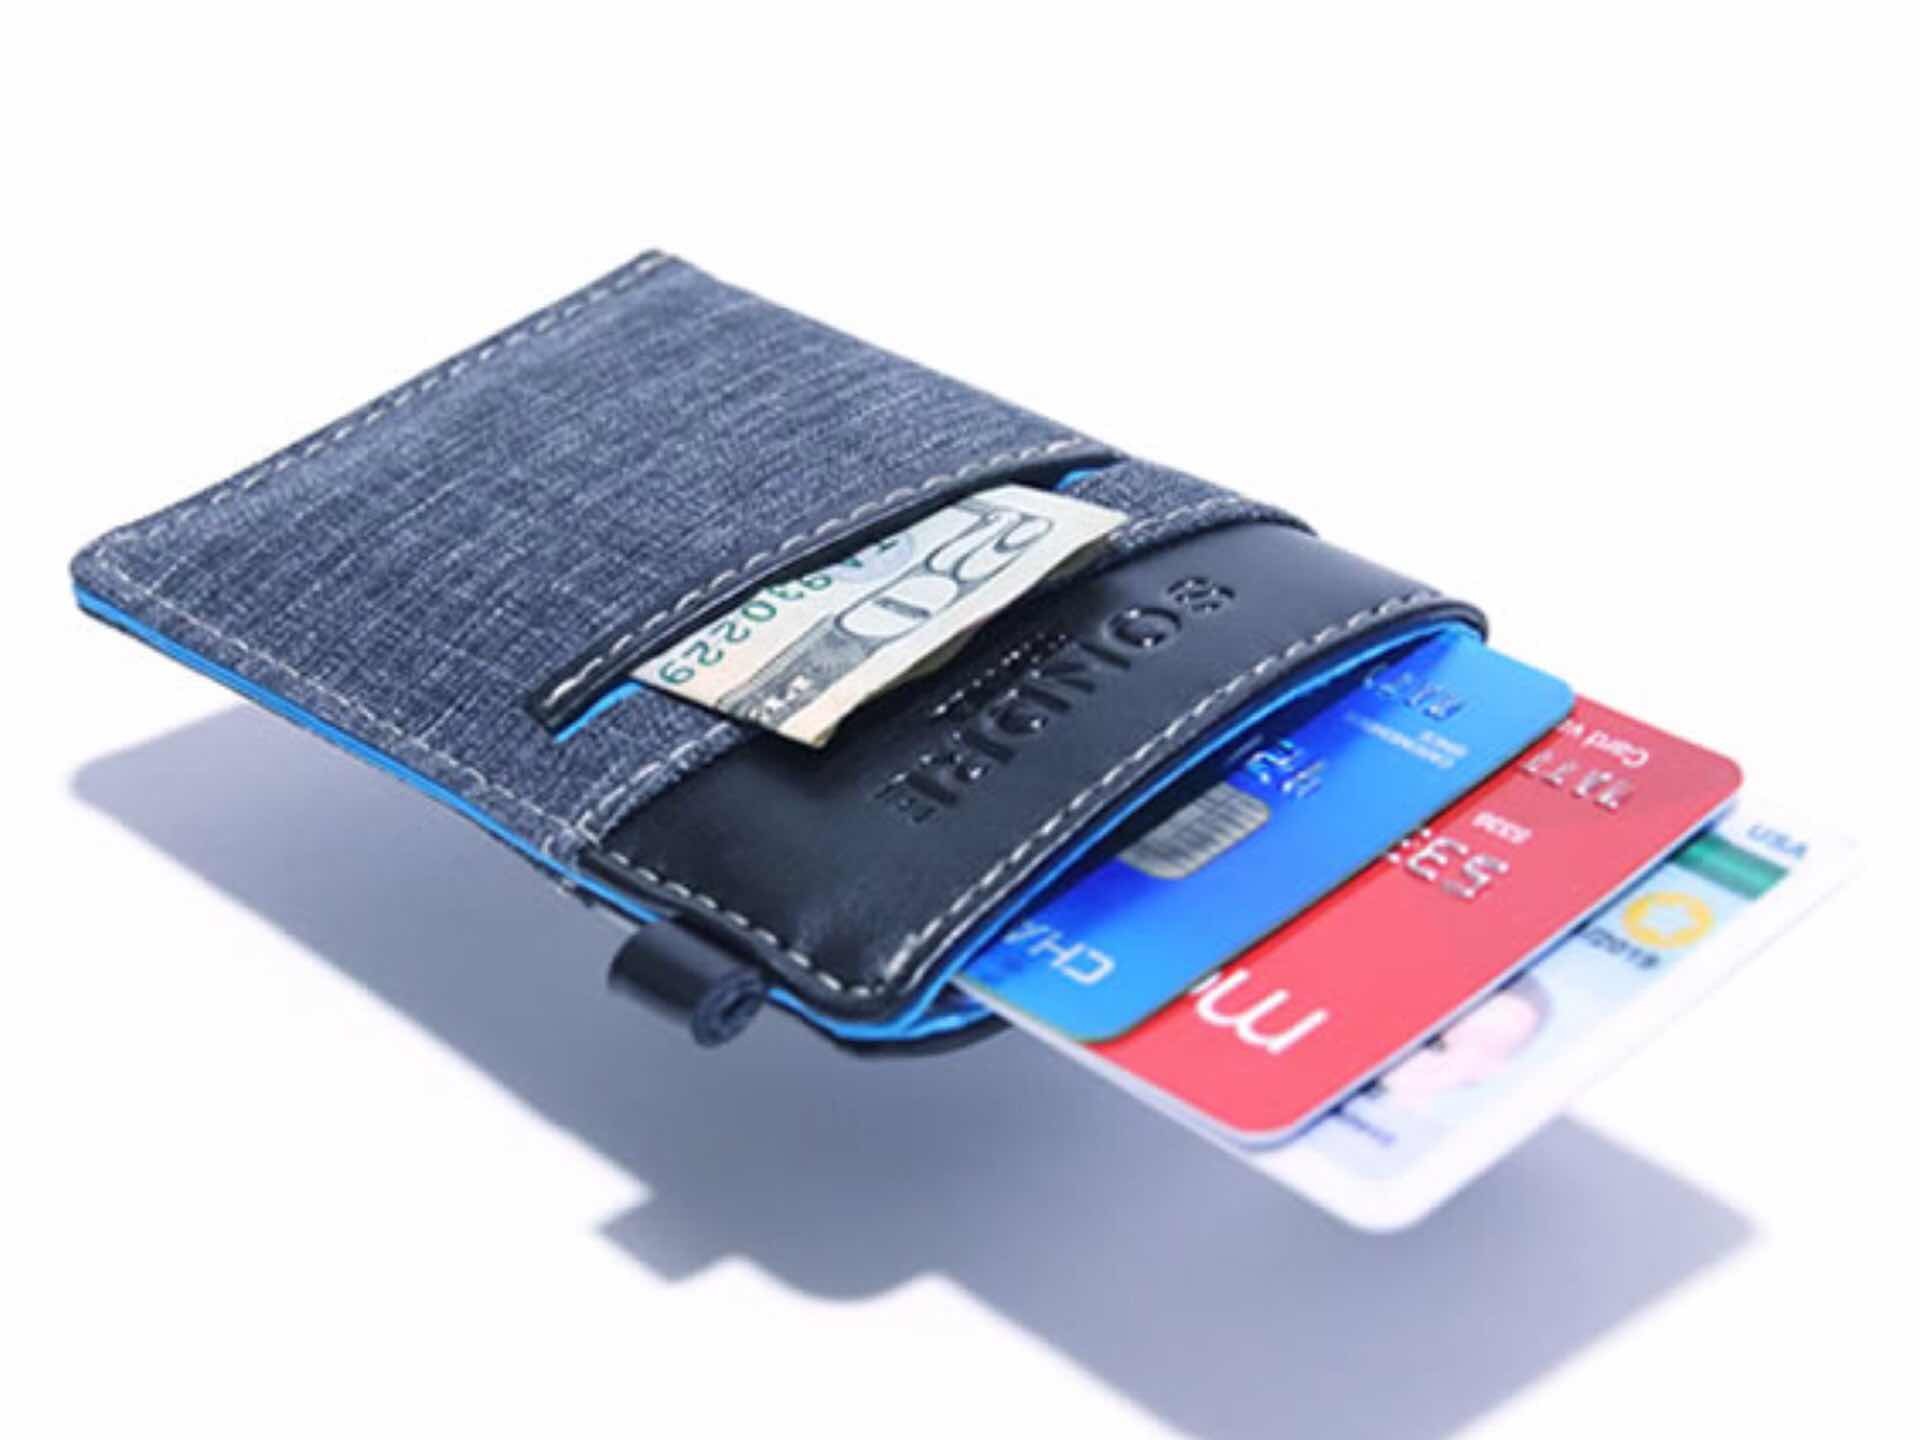 Sondre Travel Voyage wallet. ($15 as of this writing; normally $20)